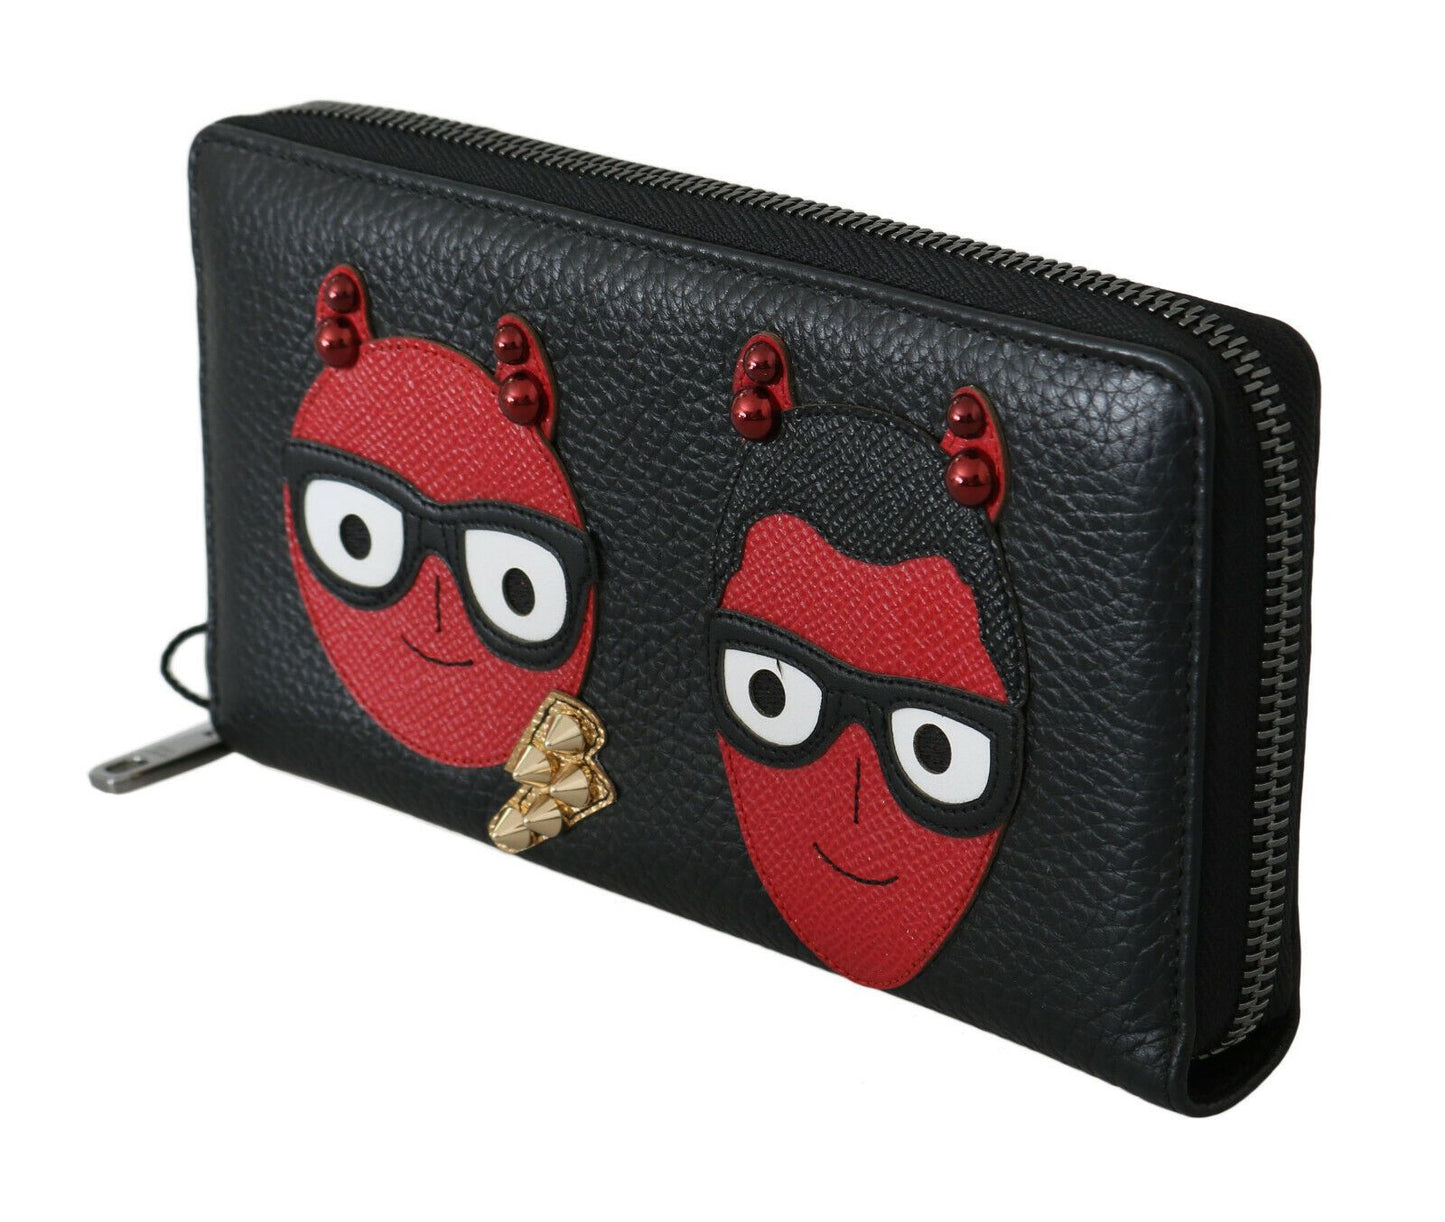 Dolce & Gabbana Black Red Leather #dgfamily Zipper Continental portefeuille